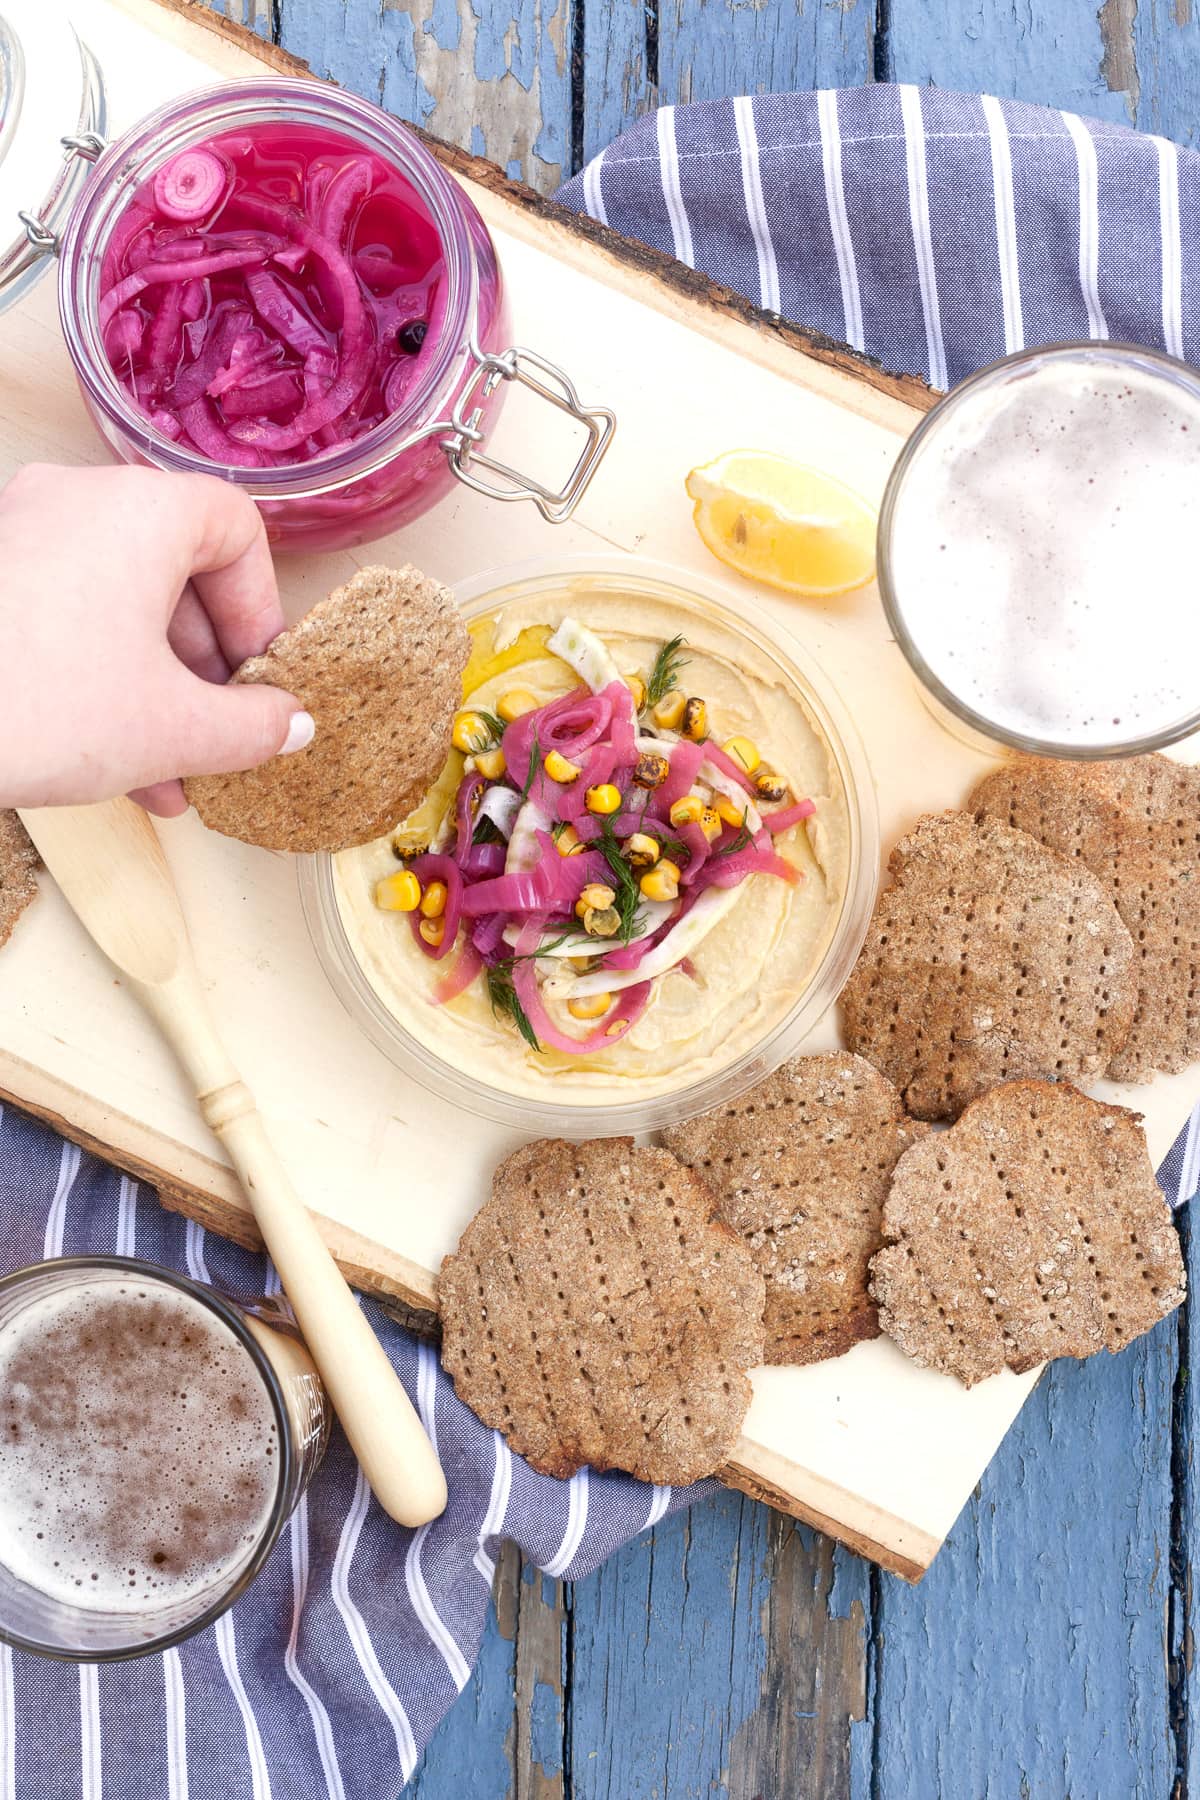 Homemade Beer-Rye Crackers and Pickled Red Onion Hummus Plate